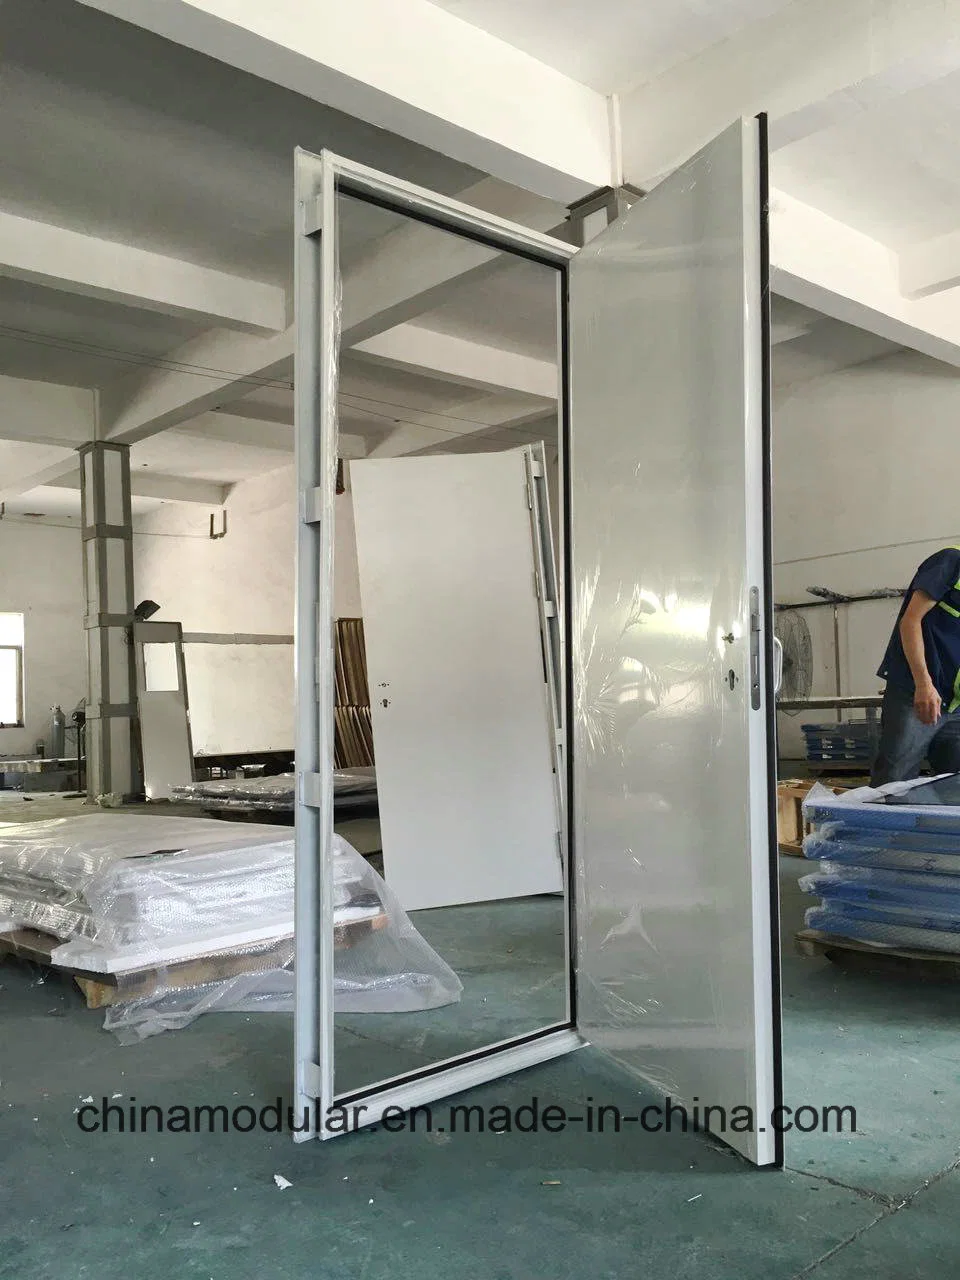 Steel Door with Double Frames for Panel Wall (CHAM-MDC400)